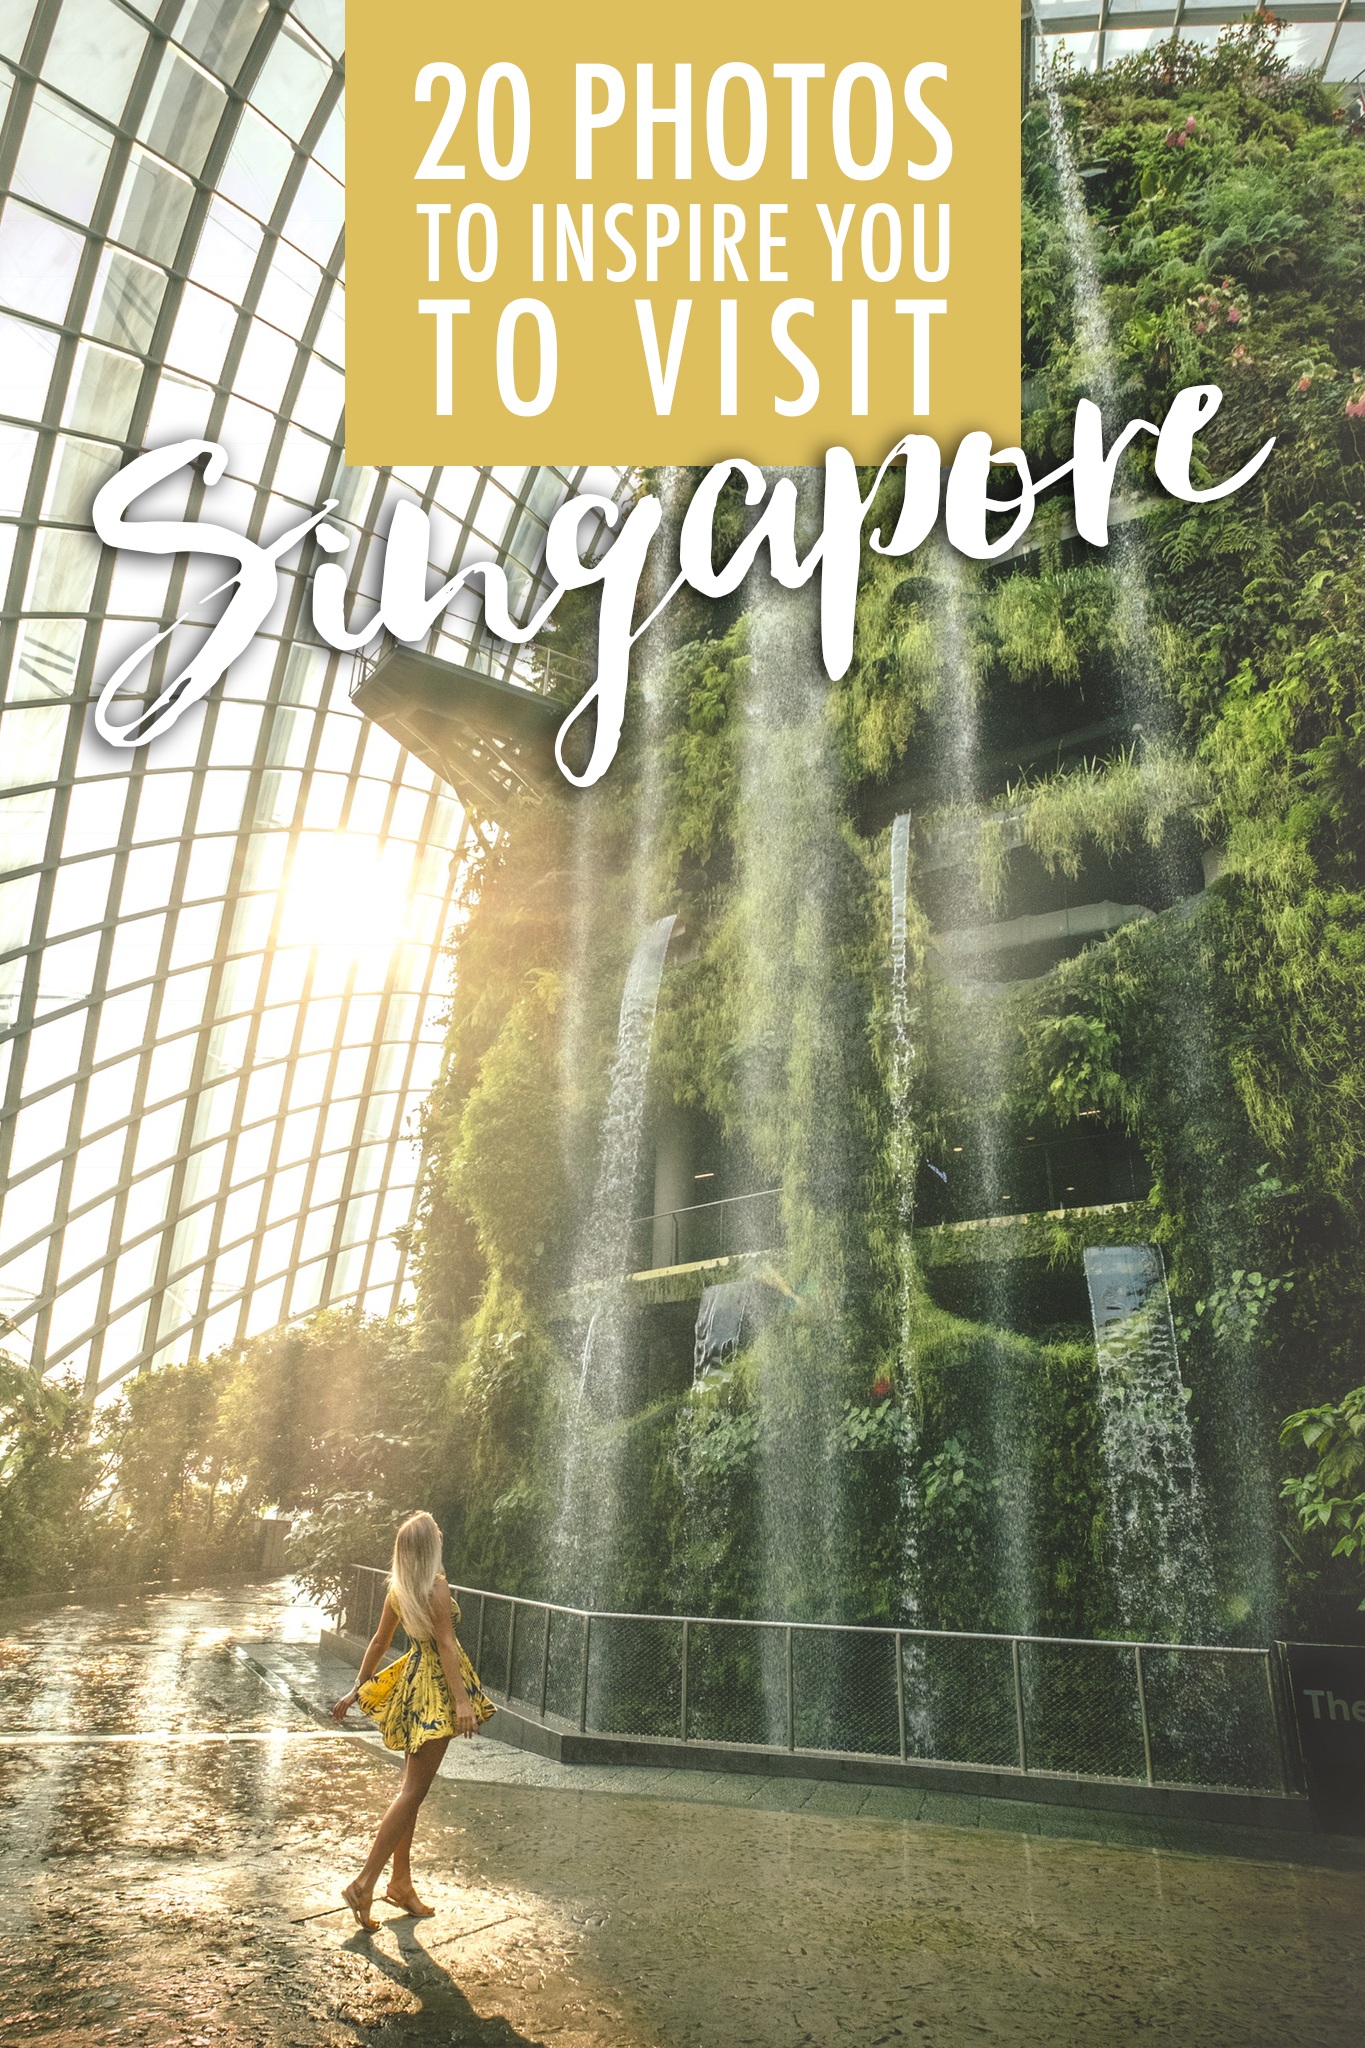 20 Photos to Inspire You to Visit Singapore